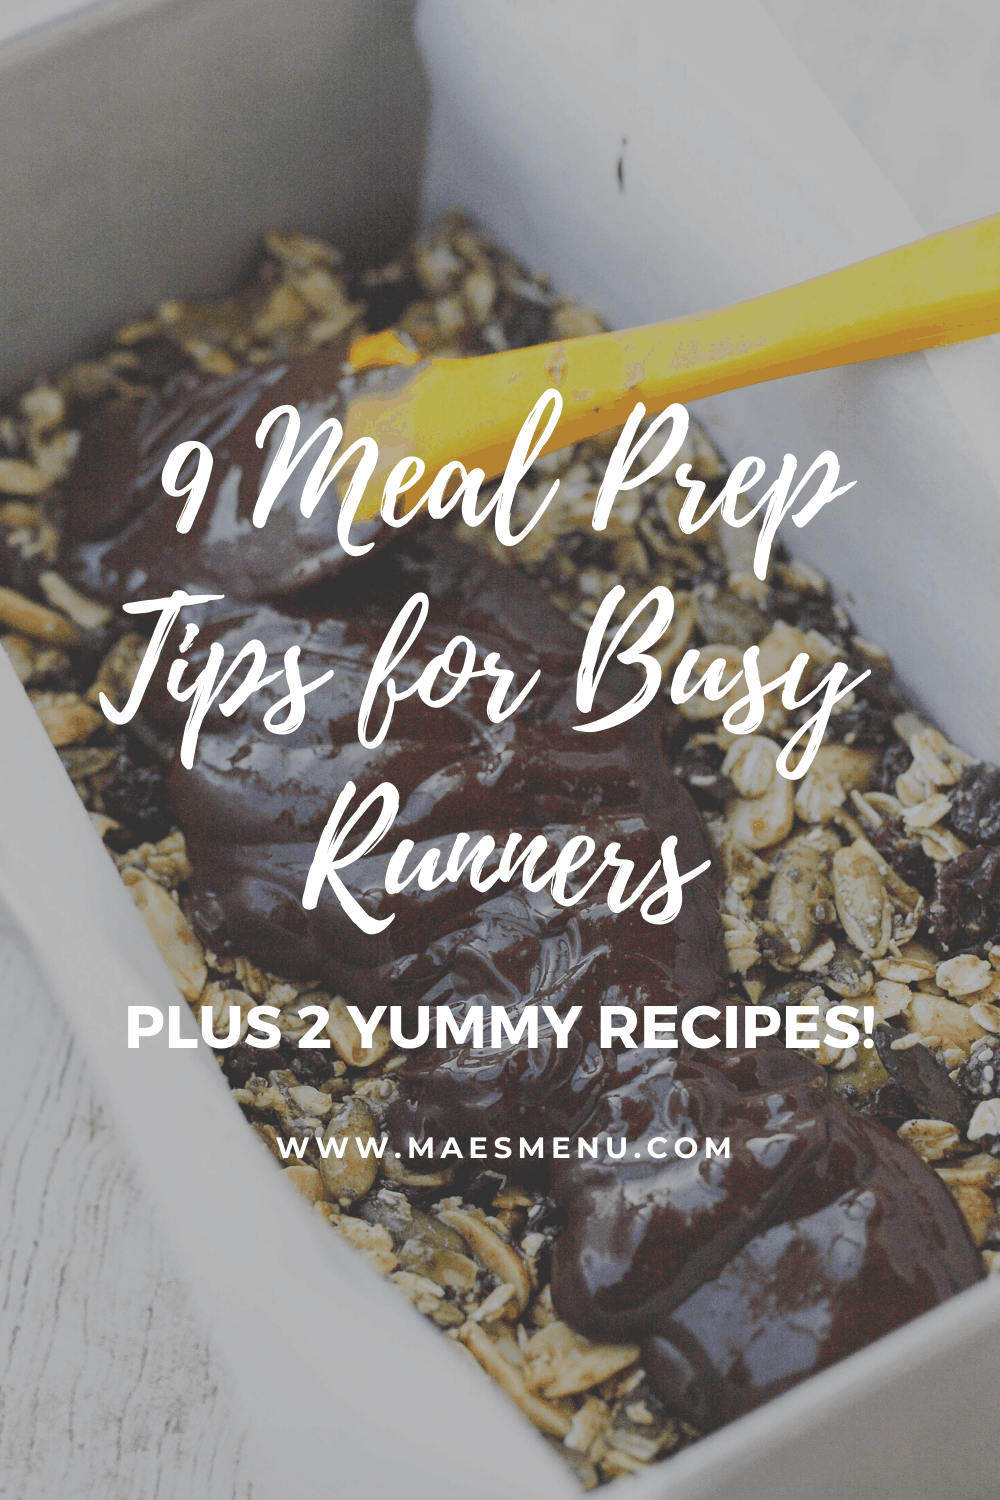 Pinterest pin for 9 meal prep tips for busy runners